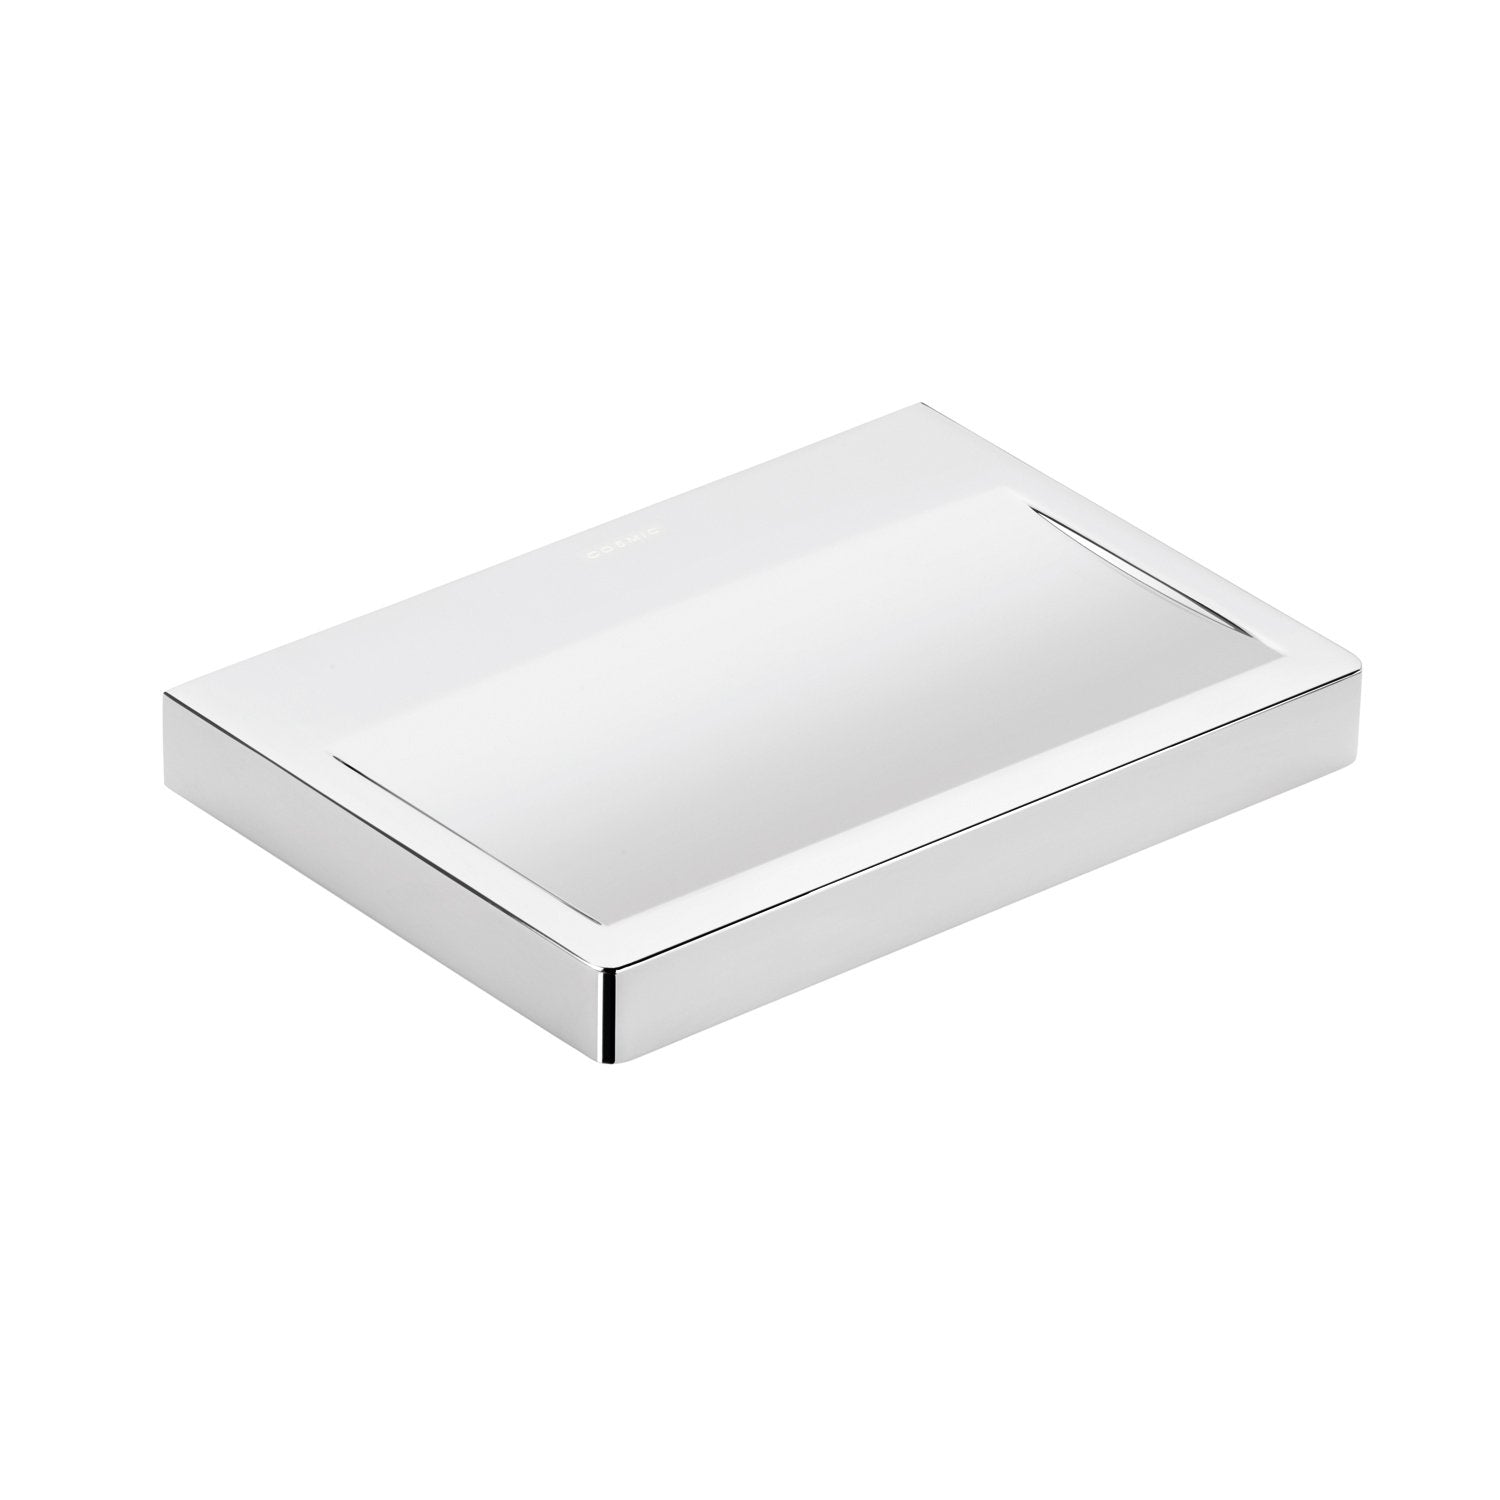 COSMIC Extreme Soap Dish, Wall Mount, Brass Body, Chrome Finish, 5-1/2 x 13/16 x 3-15/16 Inches (2530132)